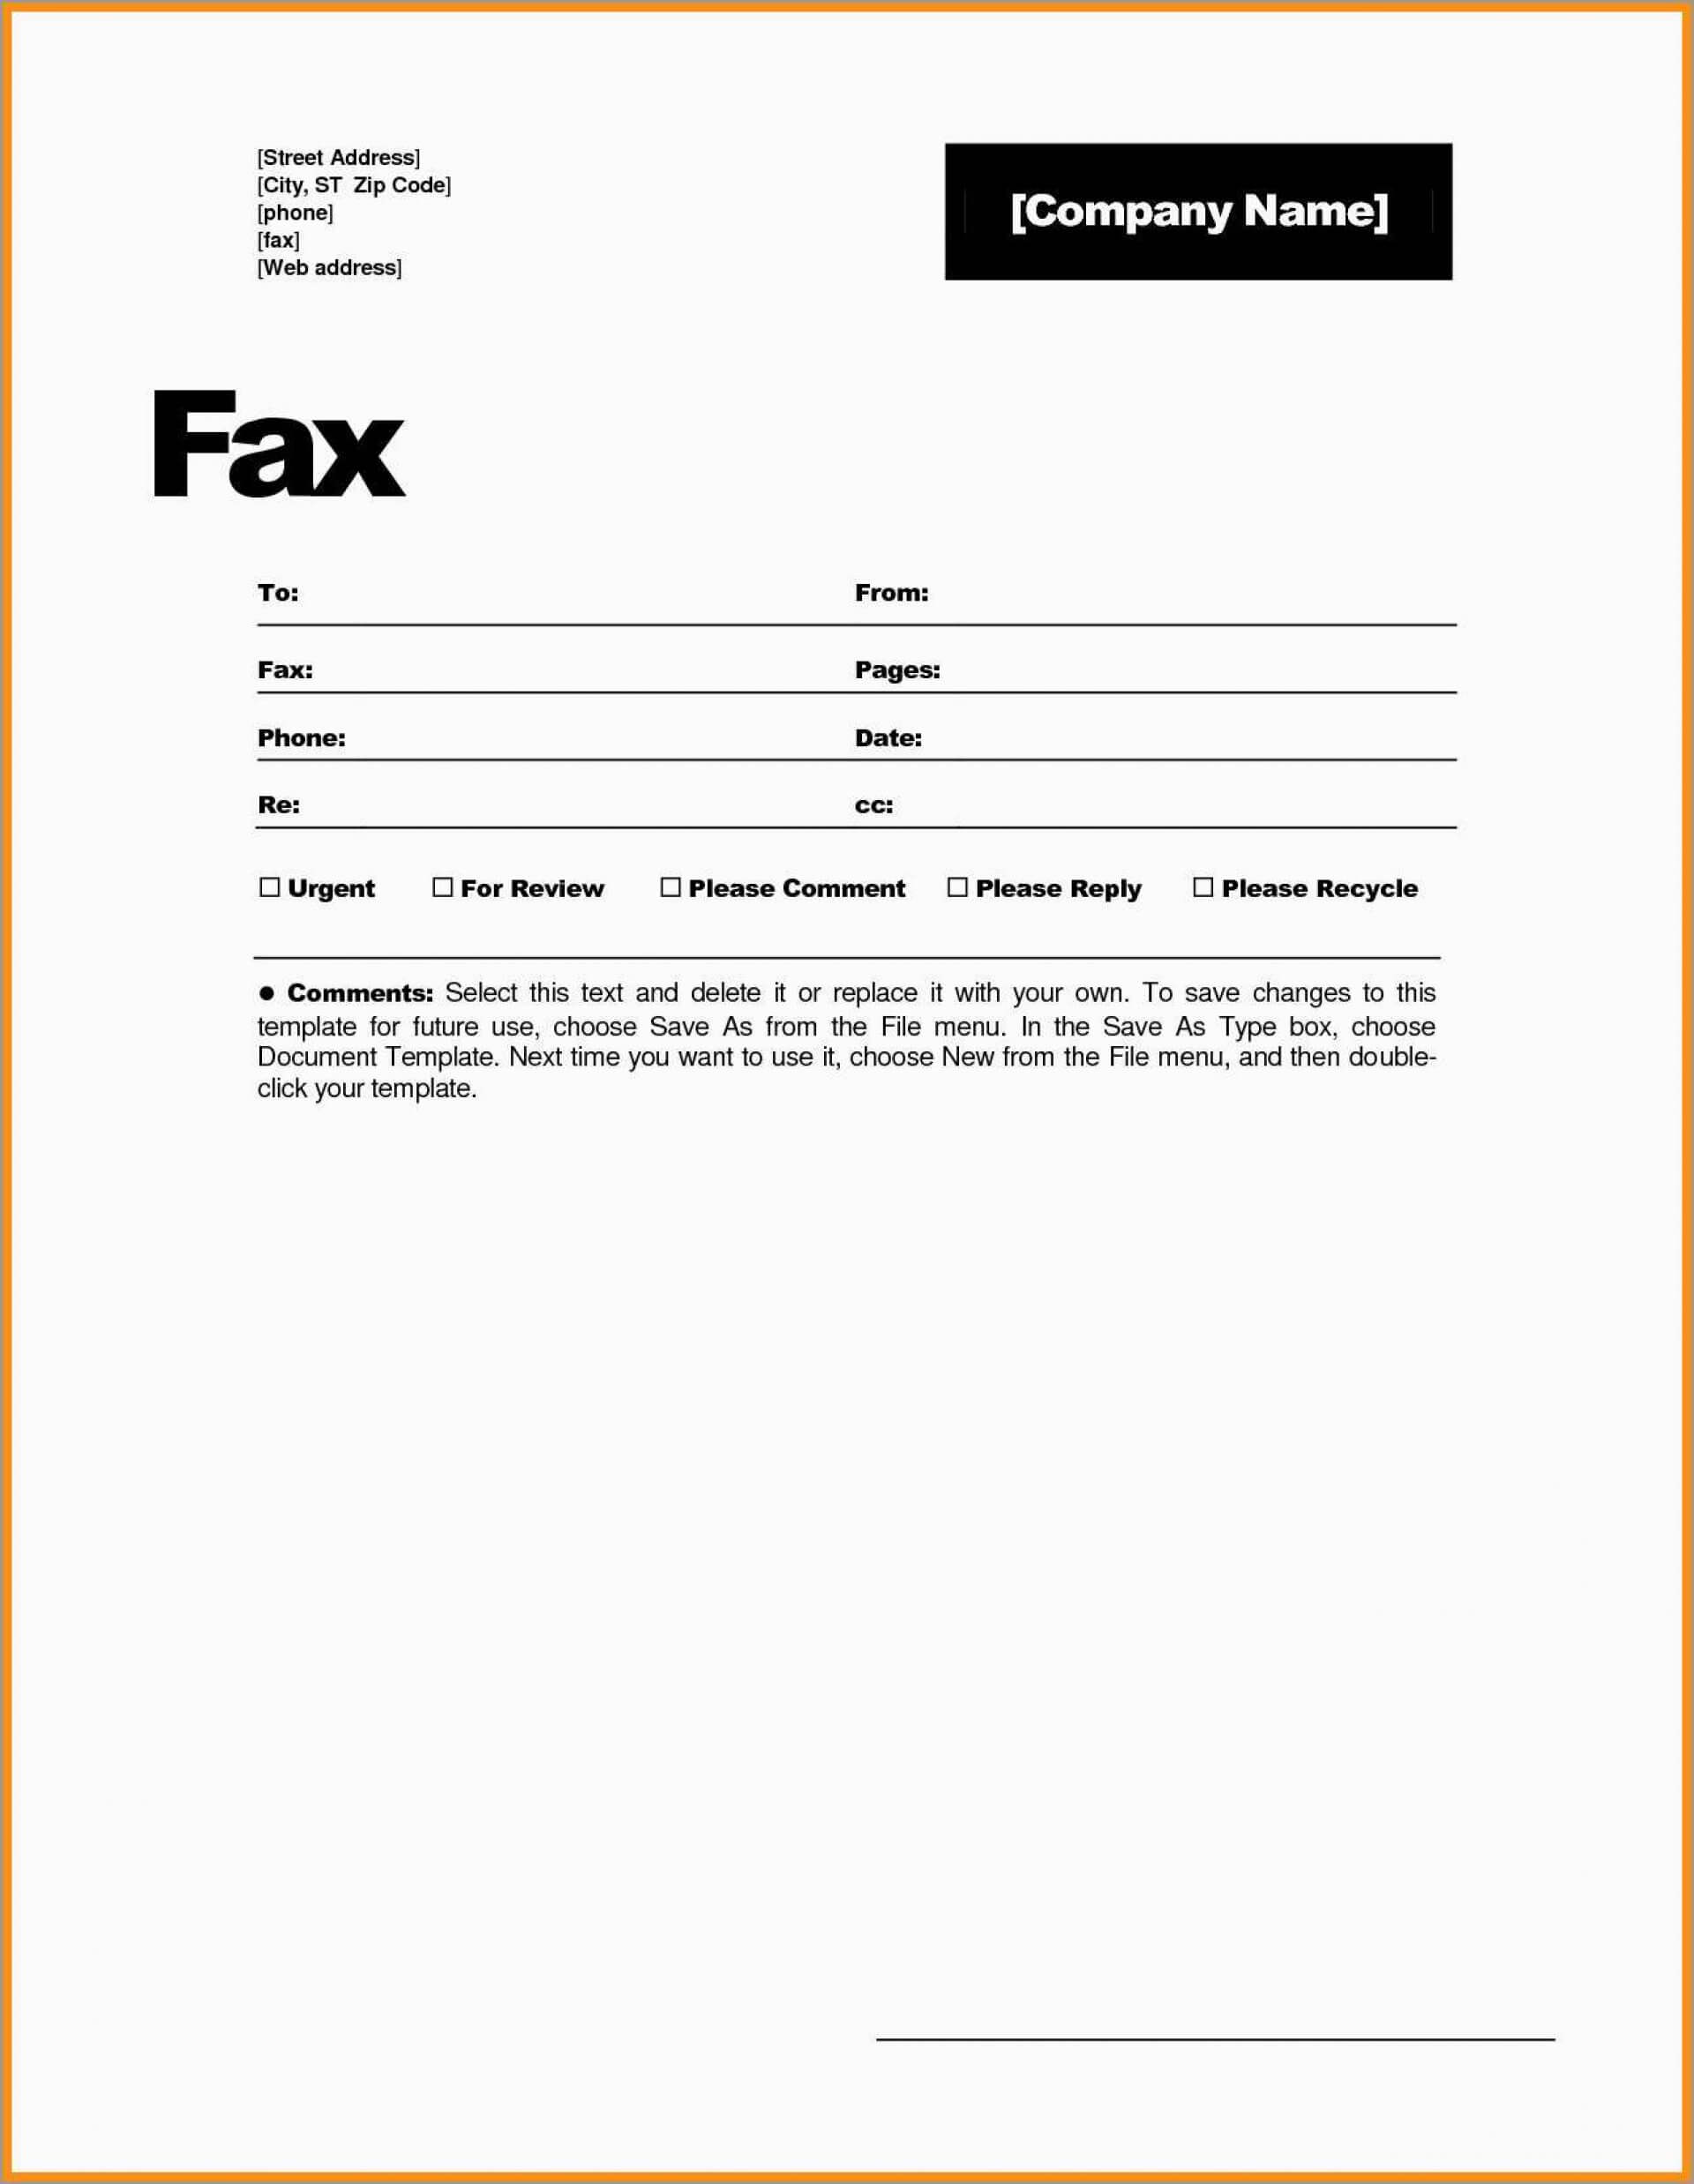 030 Fax Cover Sheet Template Free Word Stupendous Ideas Page For Fax Template Word 2010